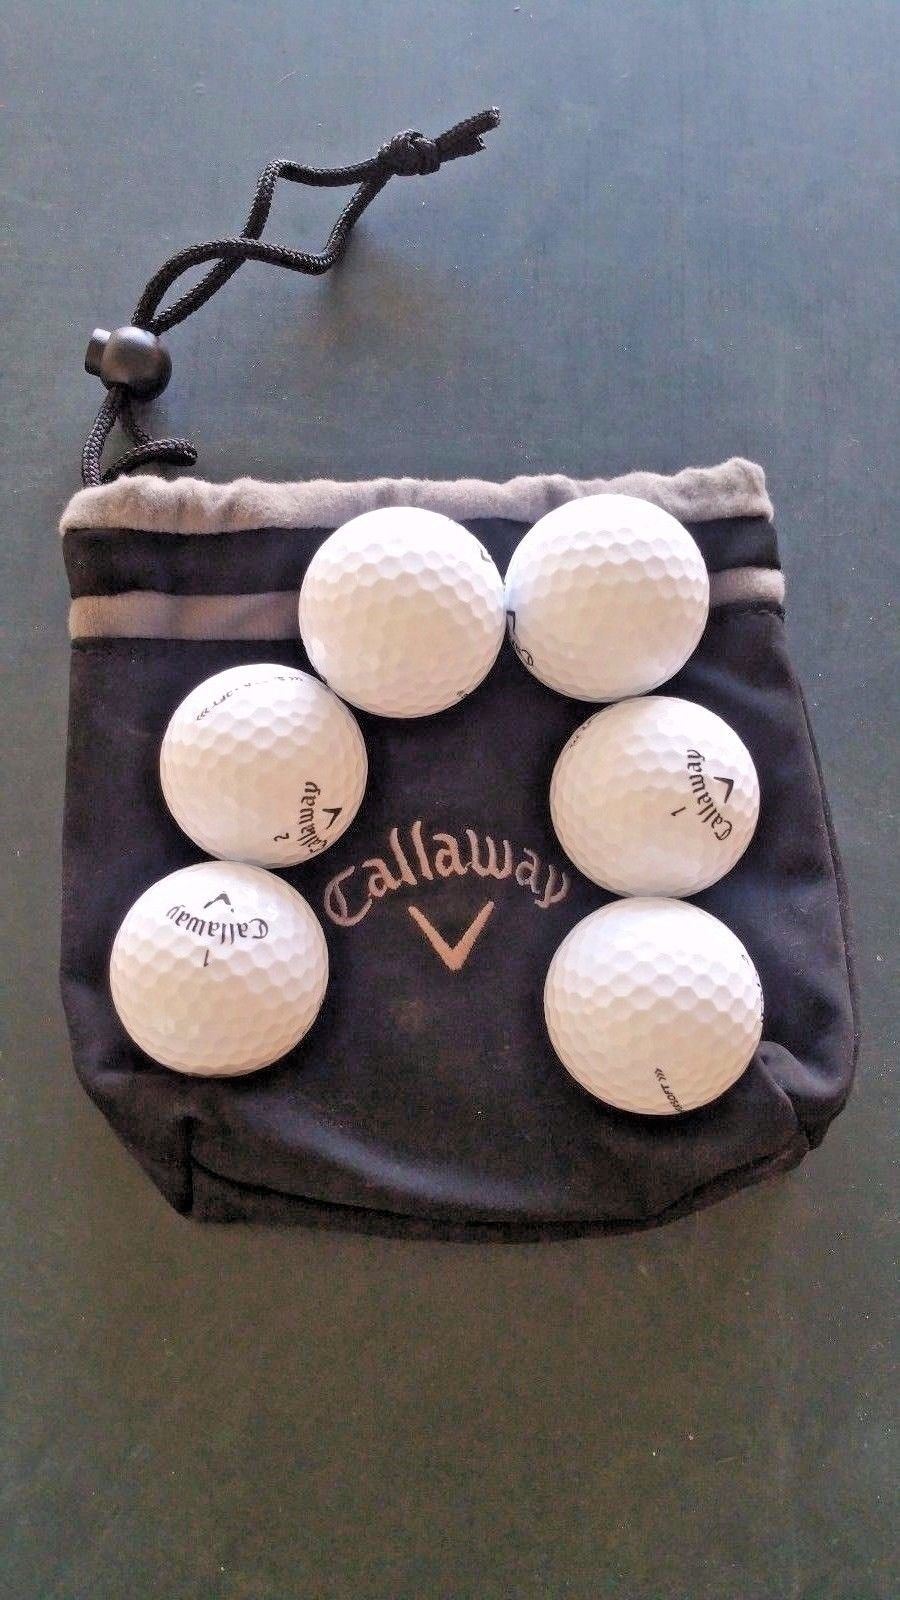 Callaway Valuables Pouch with 6 New Callaway Supersoft Golf Balls